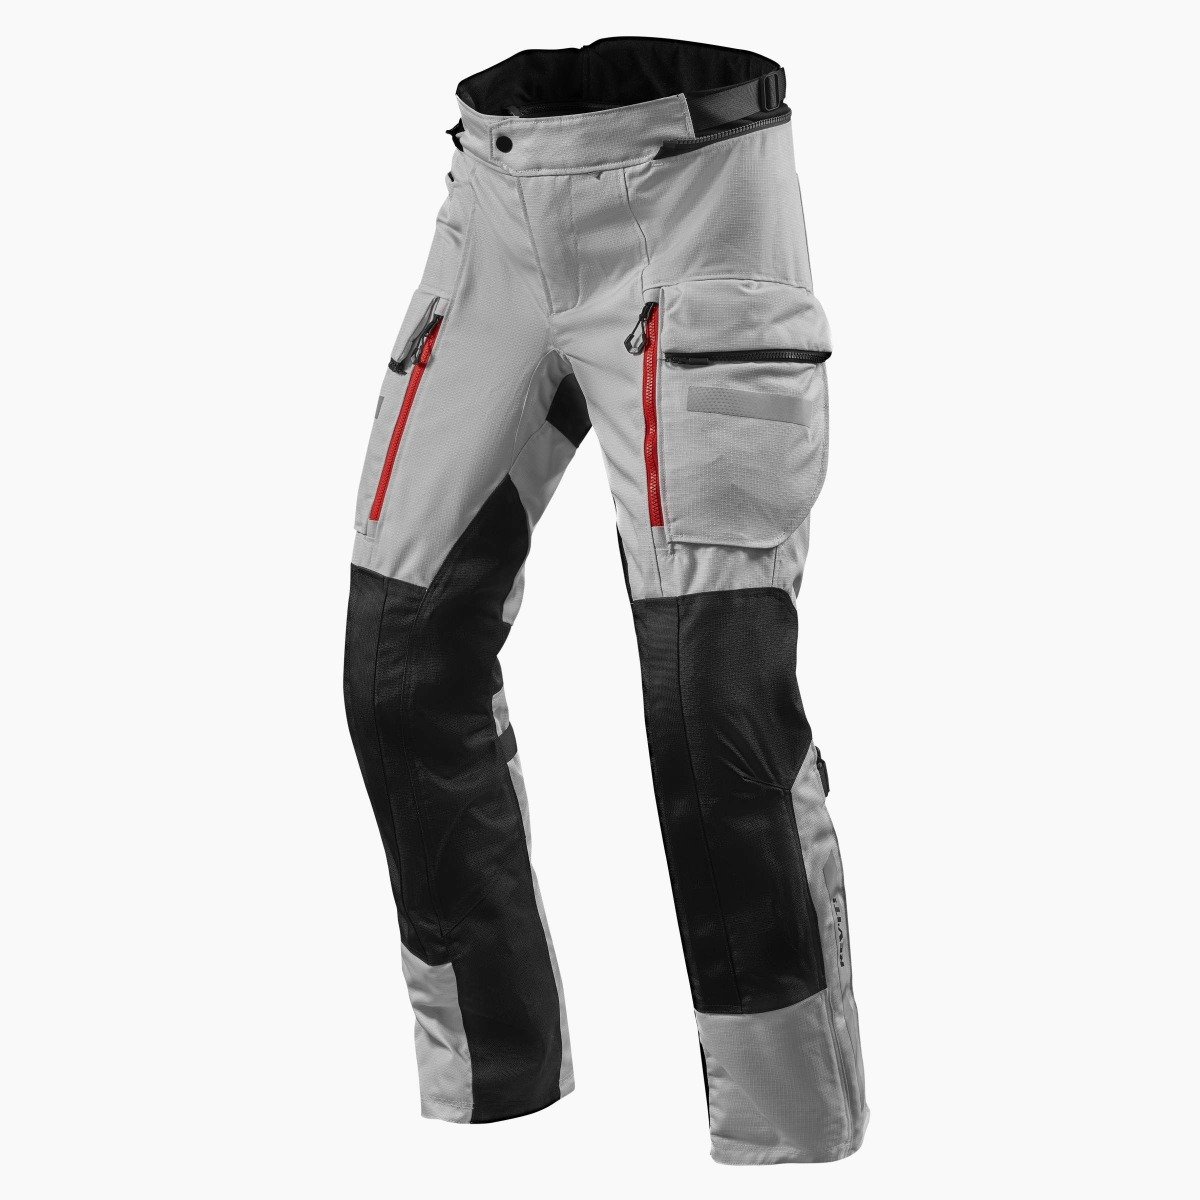 Image of REV'IT! Sand 4 H2O Standard Silver Black Motorcycle Pants Size S ID 8700001316415